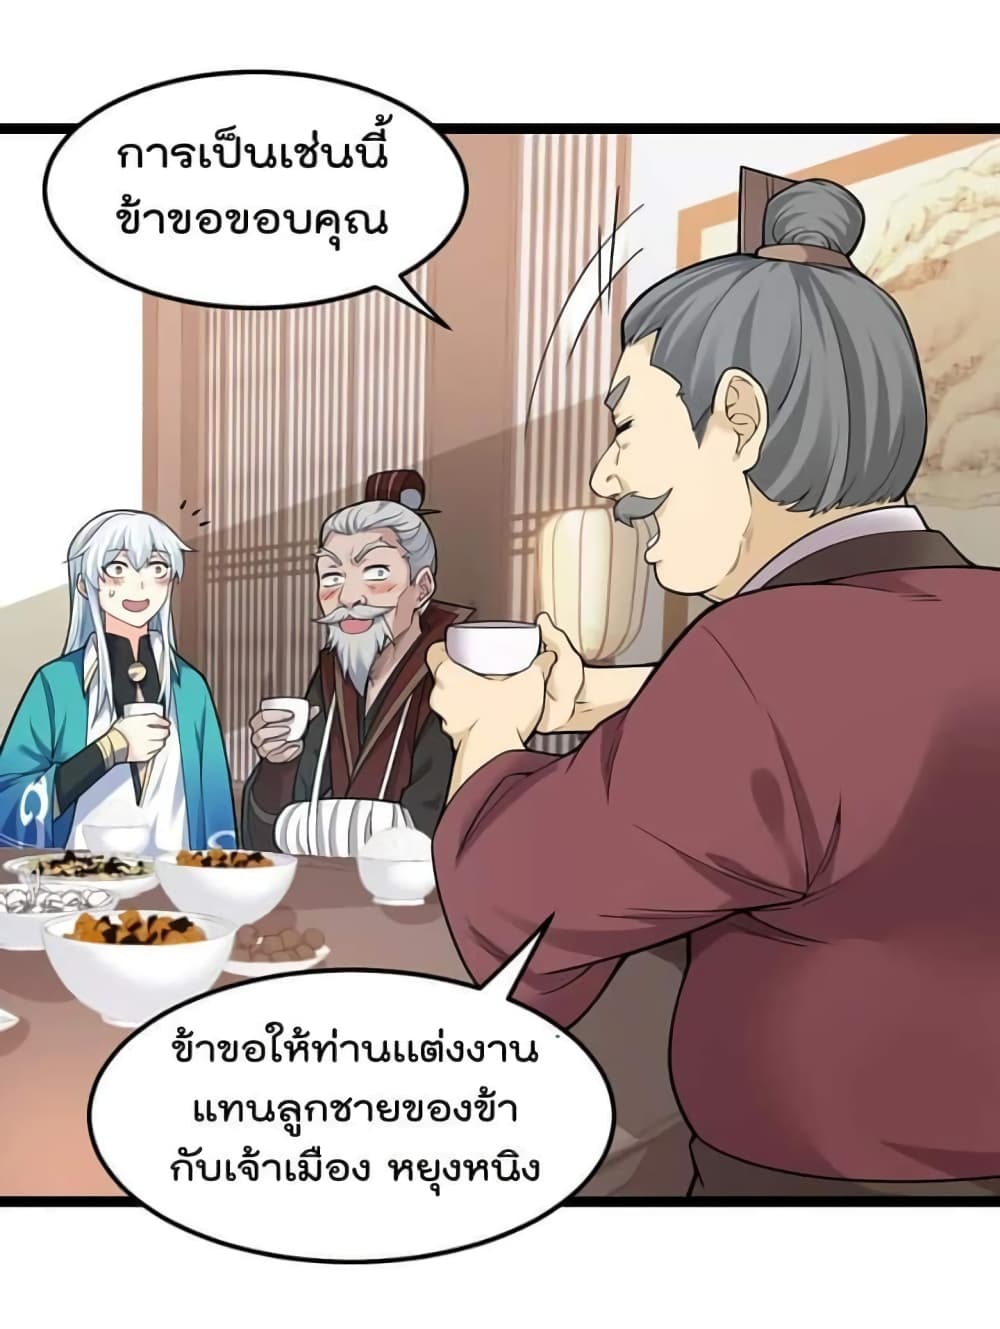 Godsian Masian from Another World ตอนที่ 98 (17)